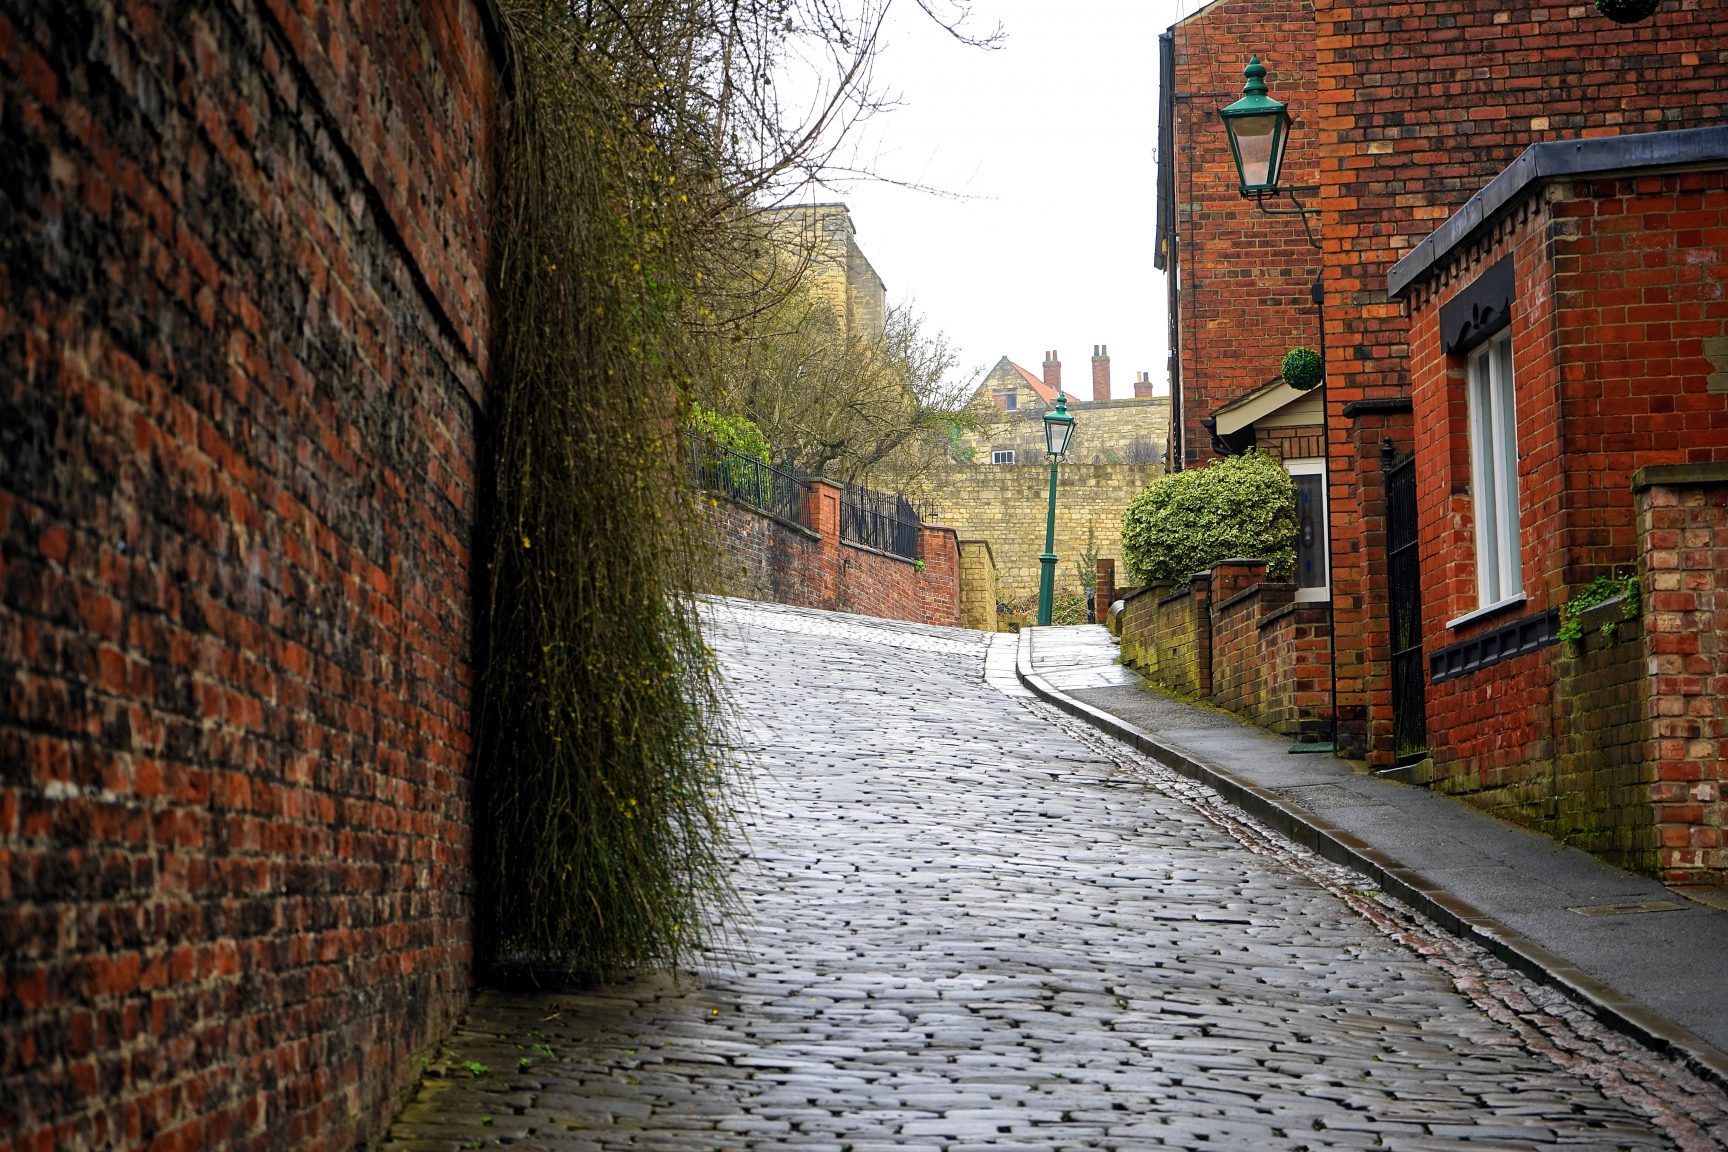 A small cobbled street, with red brick houses. It's a grey day and the street is damp.